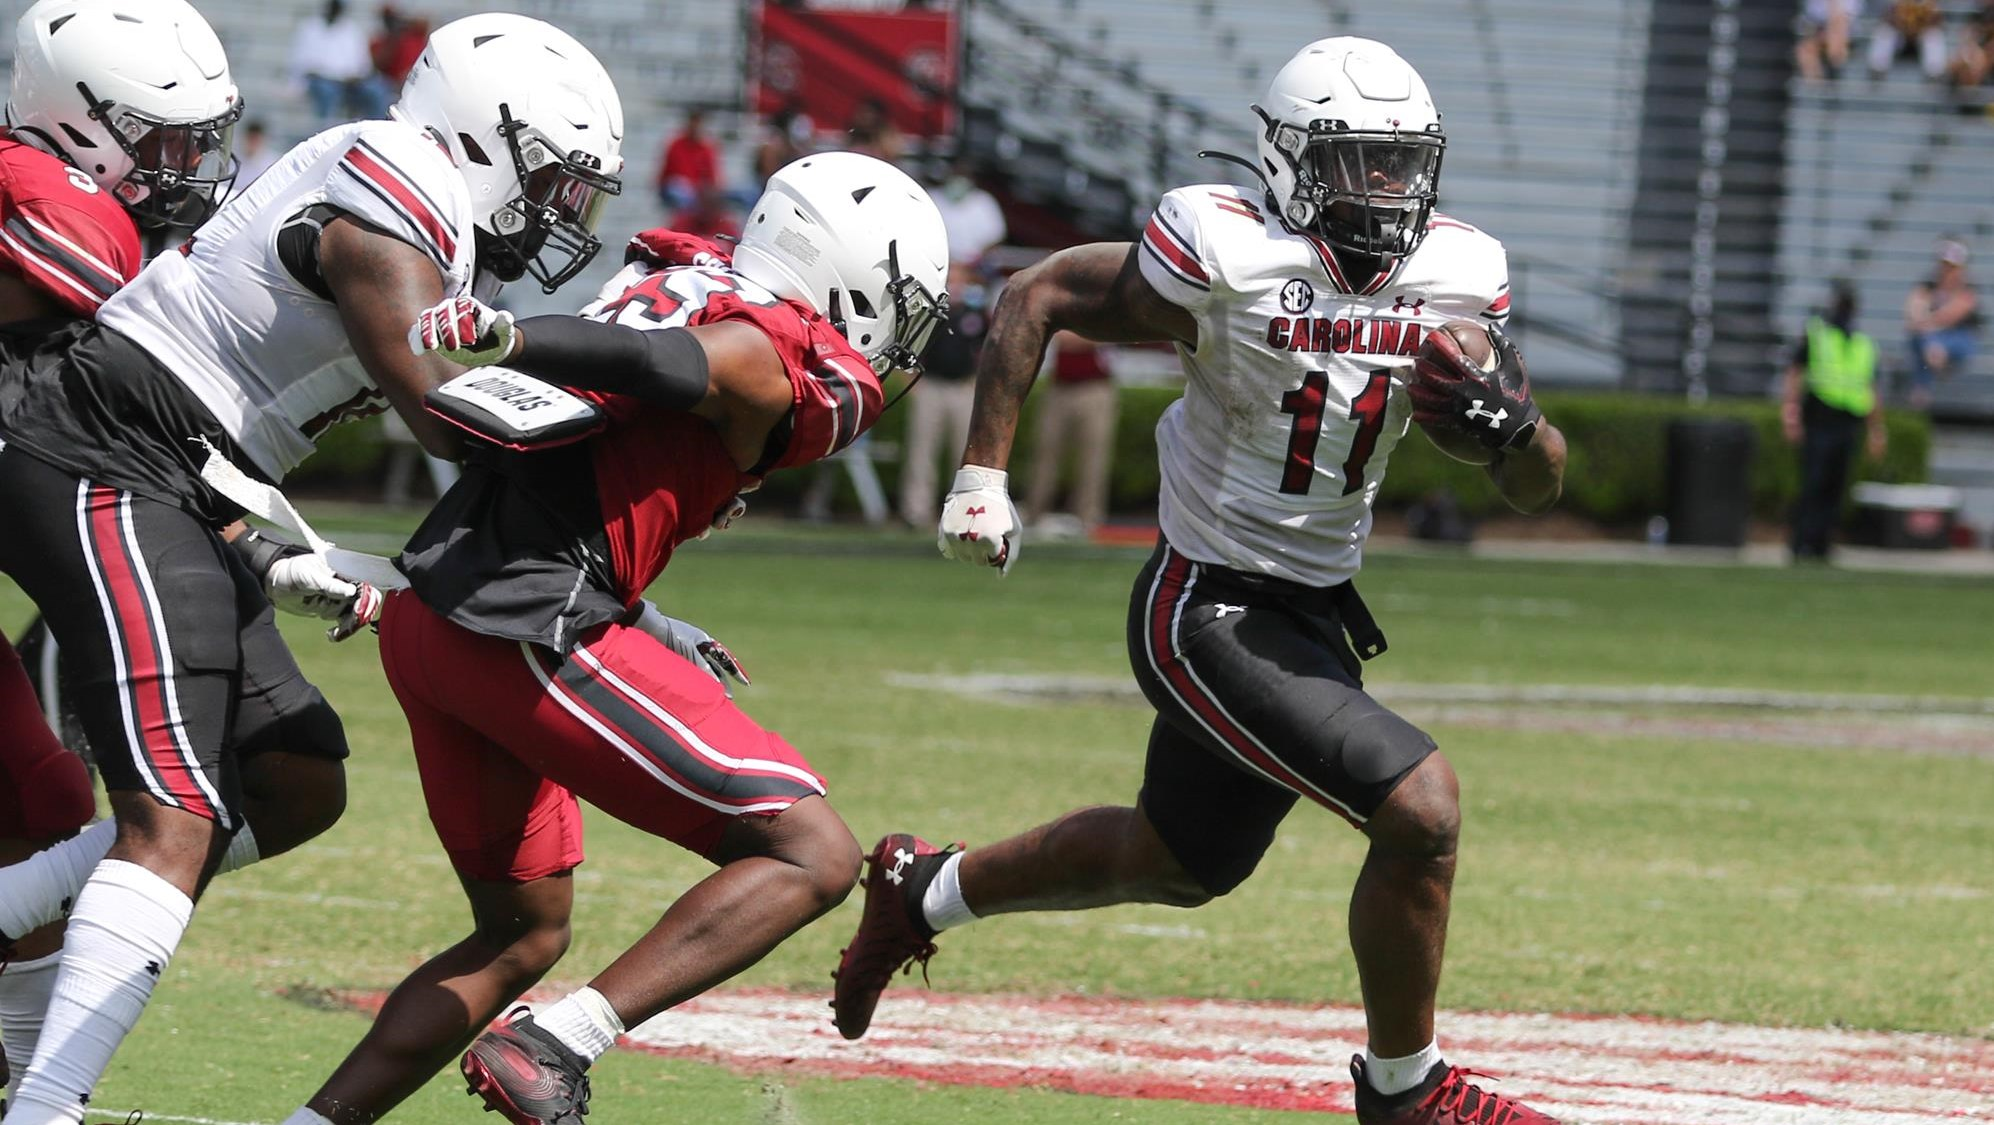 White Leads Garnet to 14-10 Win over Black in Annual Spring Game